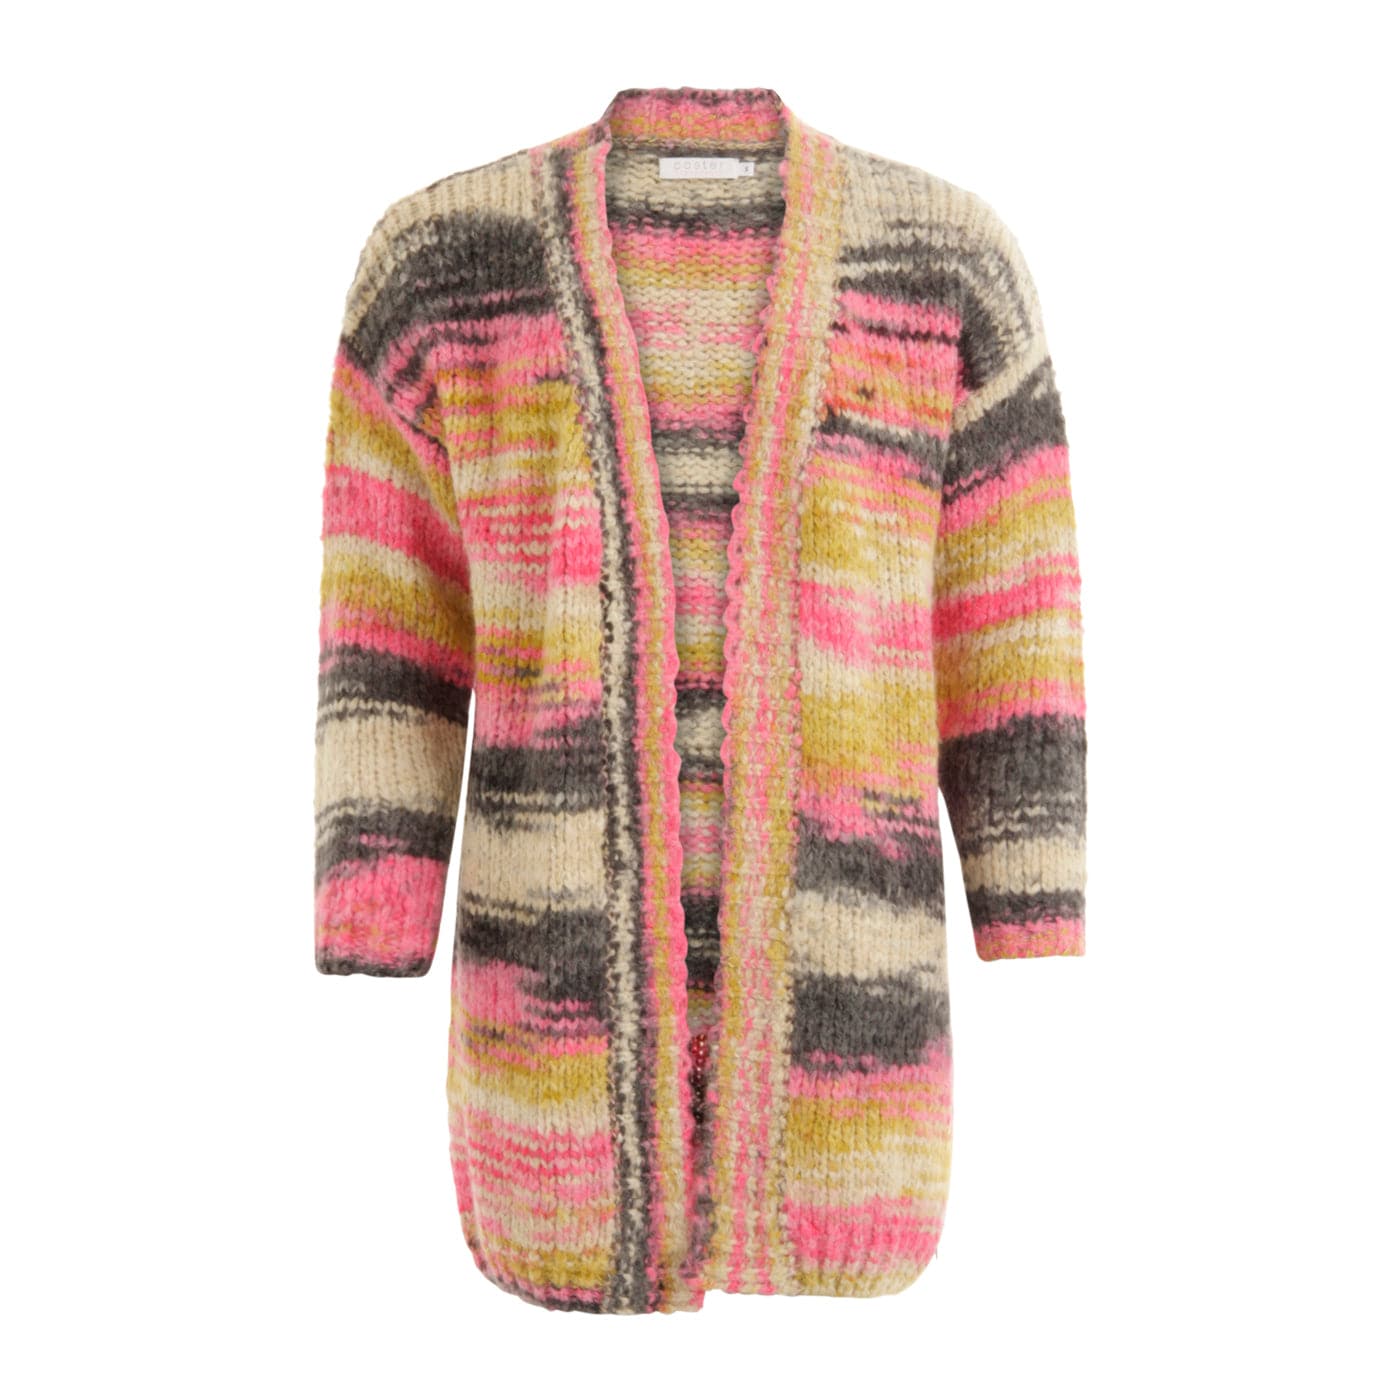 Coster Copenhagen hand knitted volume cardigan in multi colour - Your Style Your Story